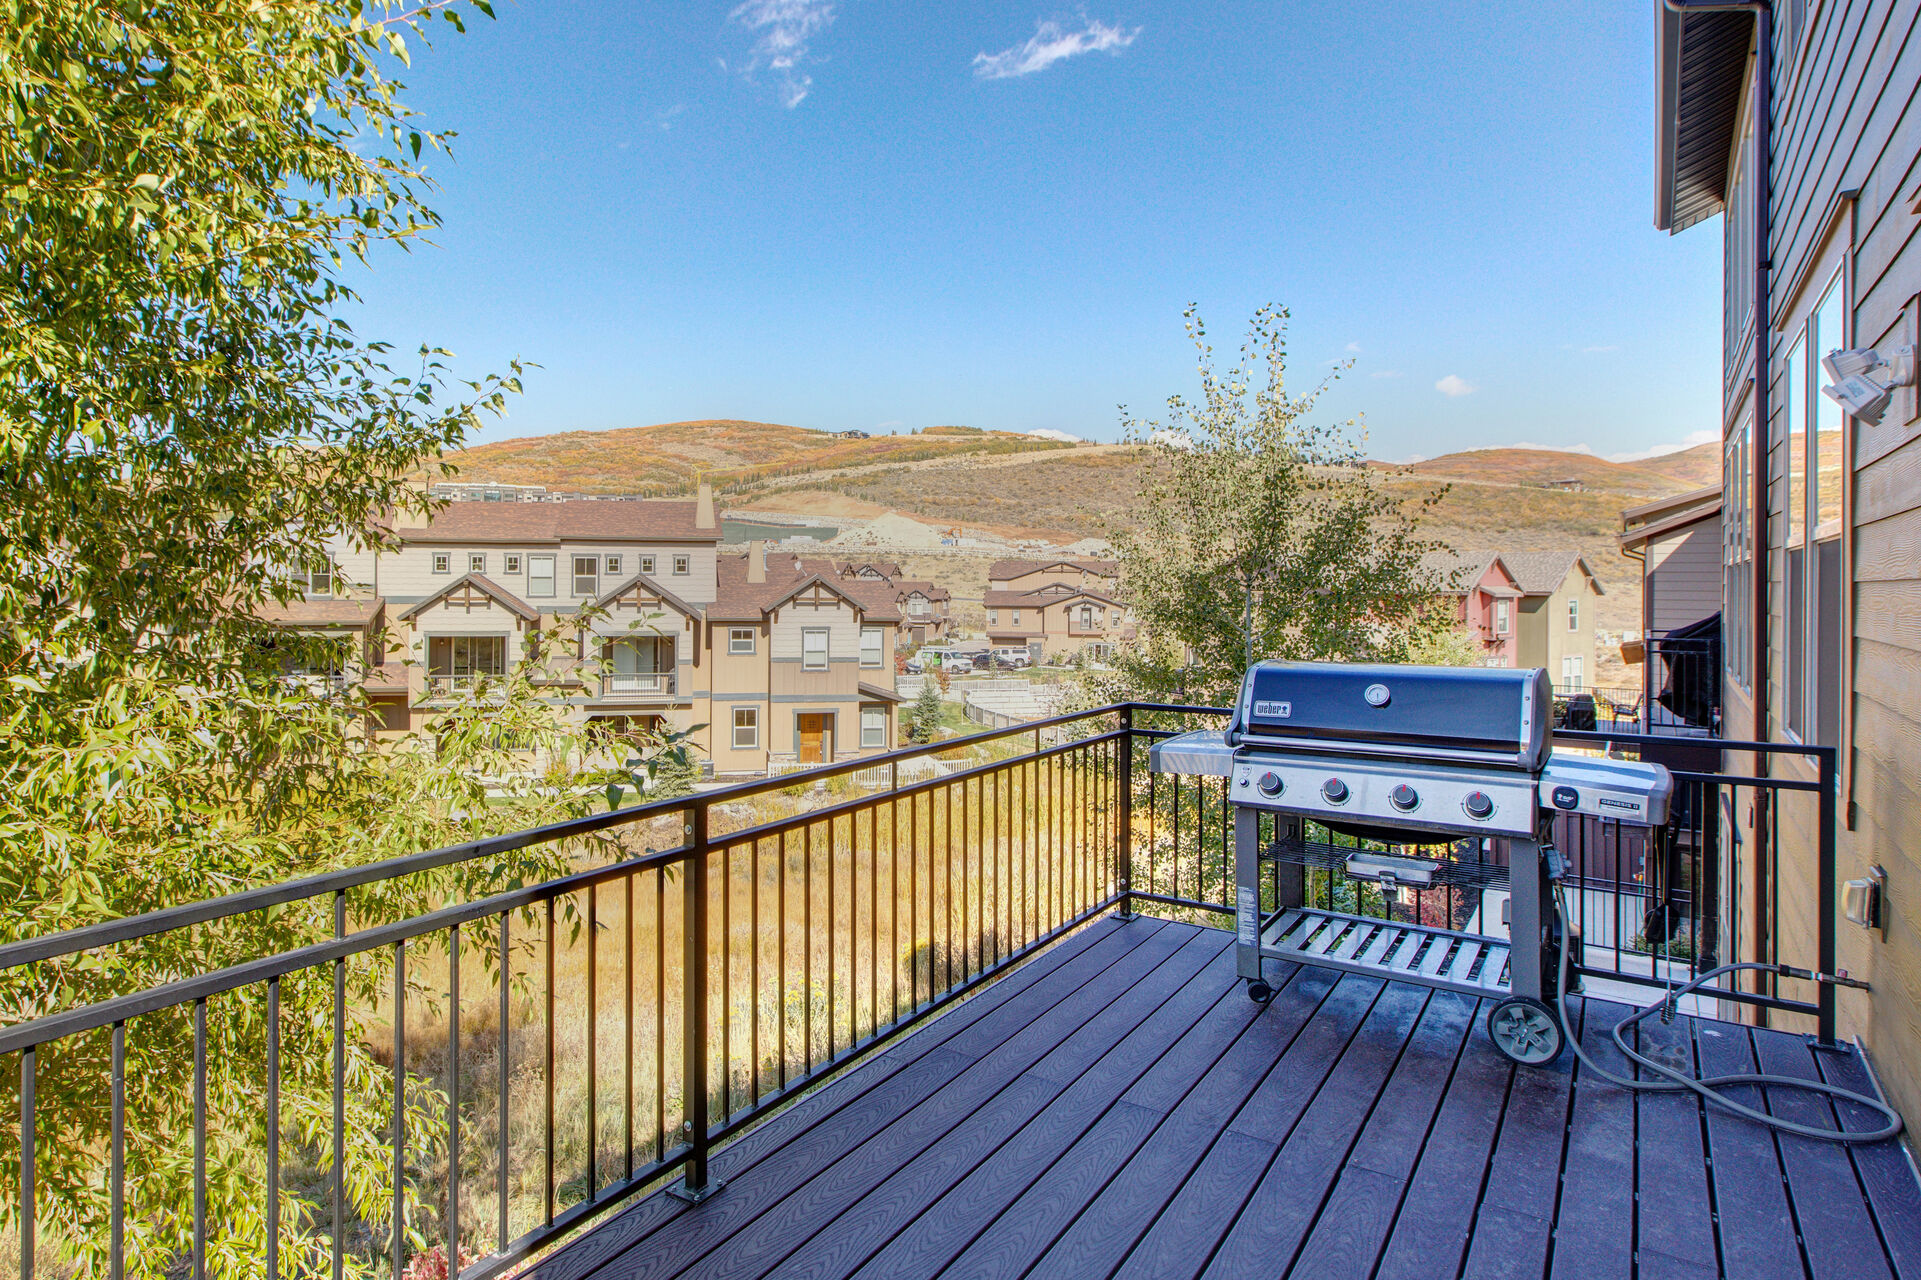 Private Deck off main living area with propane BBQ and beautiful surrounding views